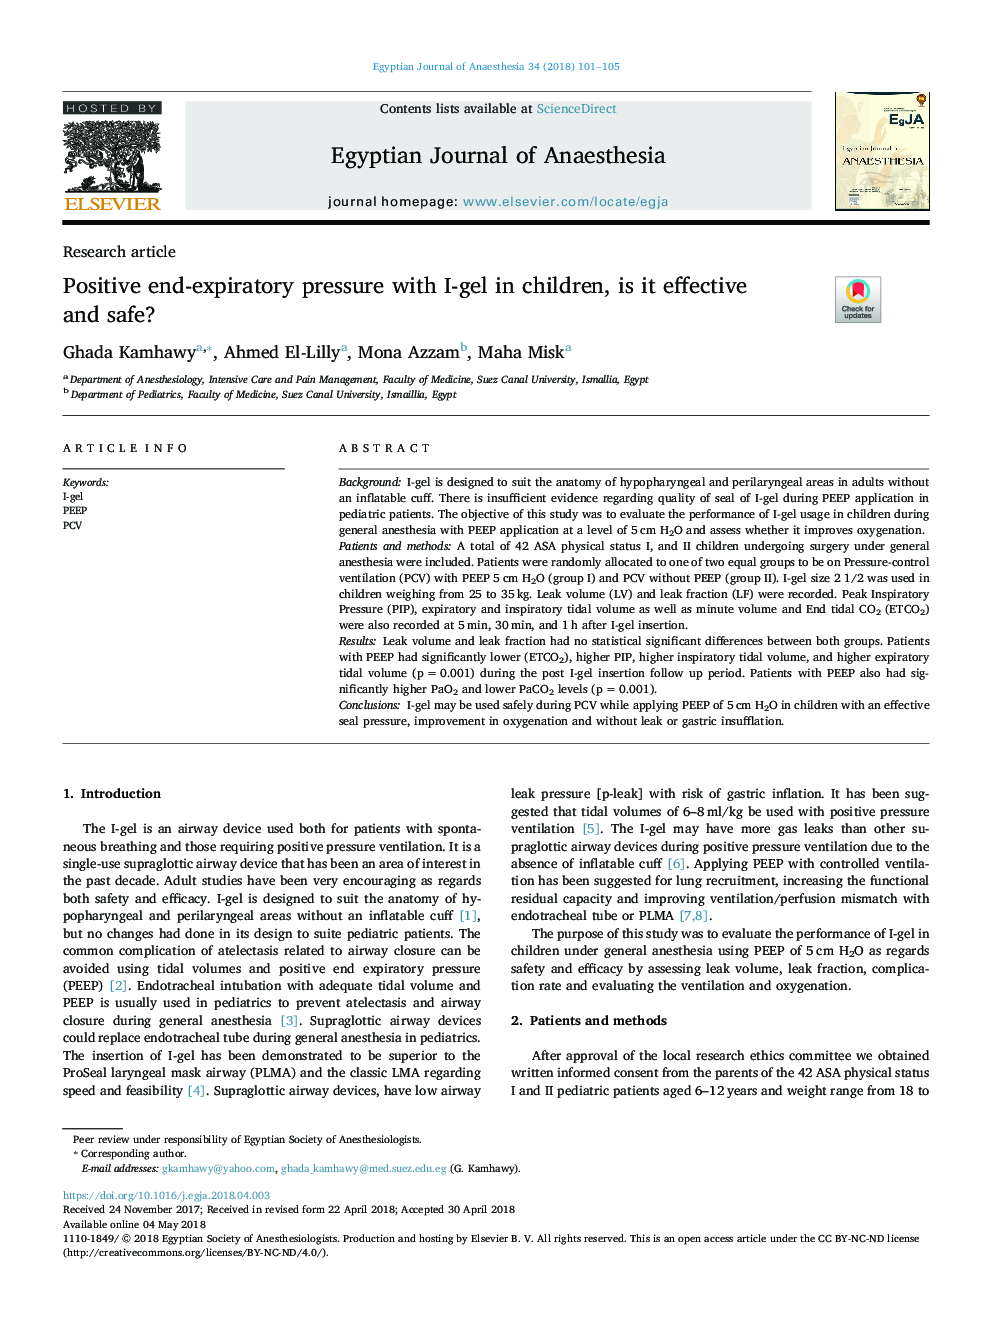 Positive end-expiratory pressure with I-gel in children, is it effective and safe?